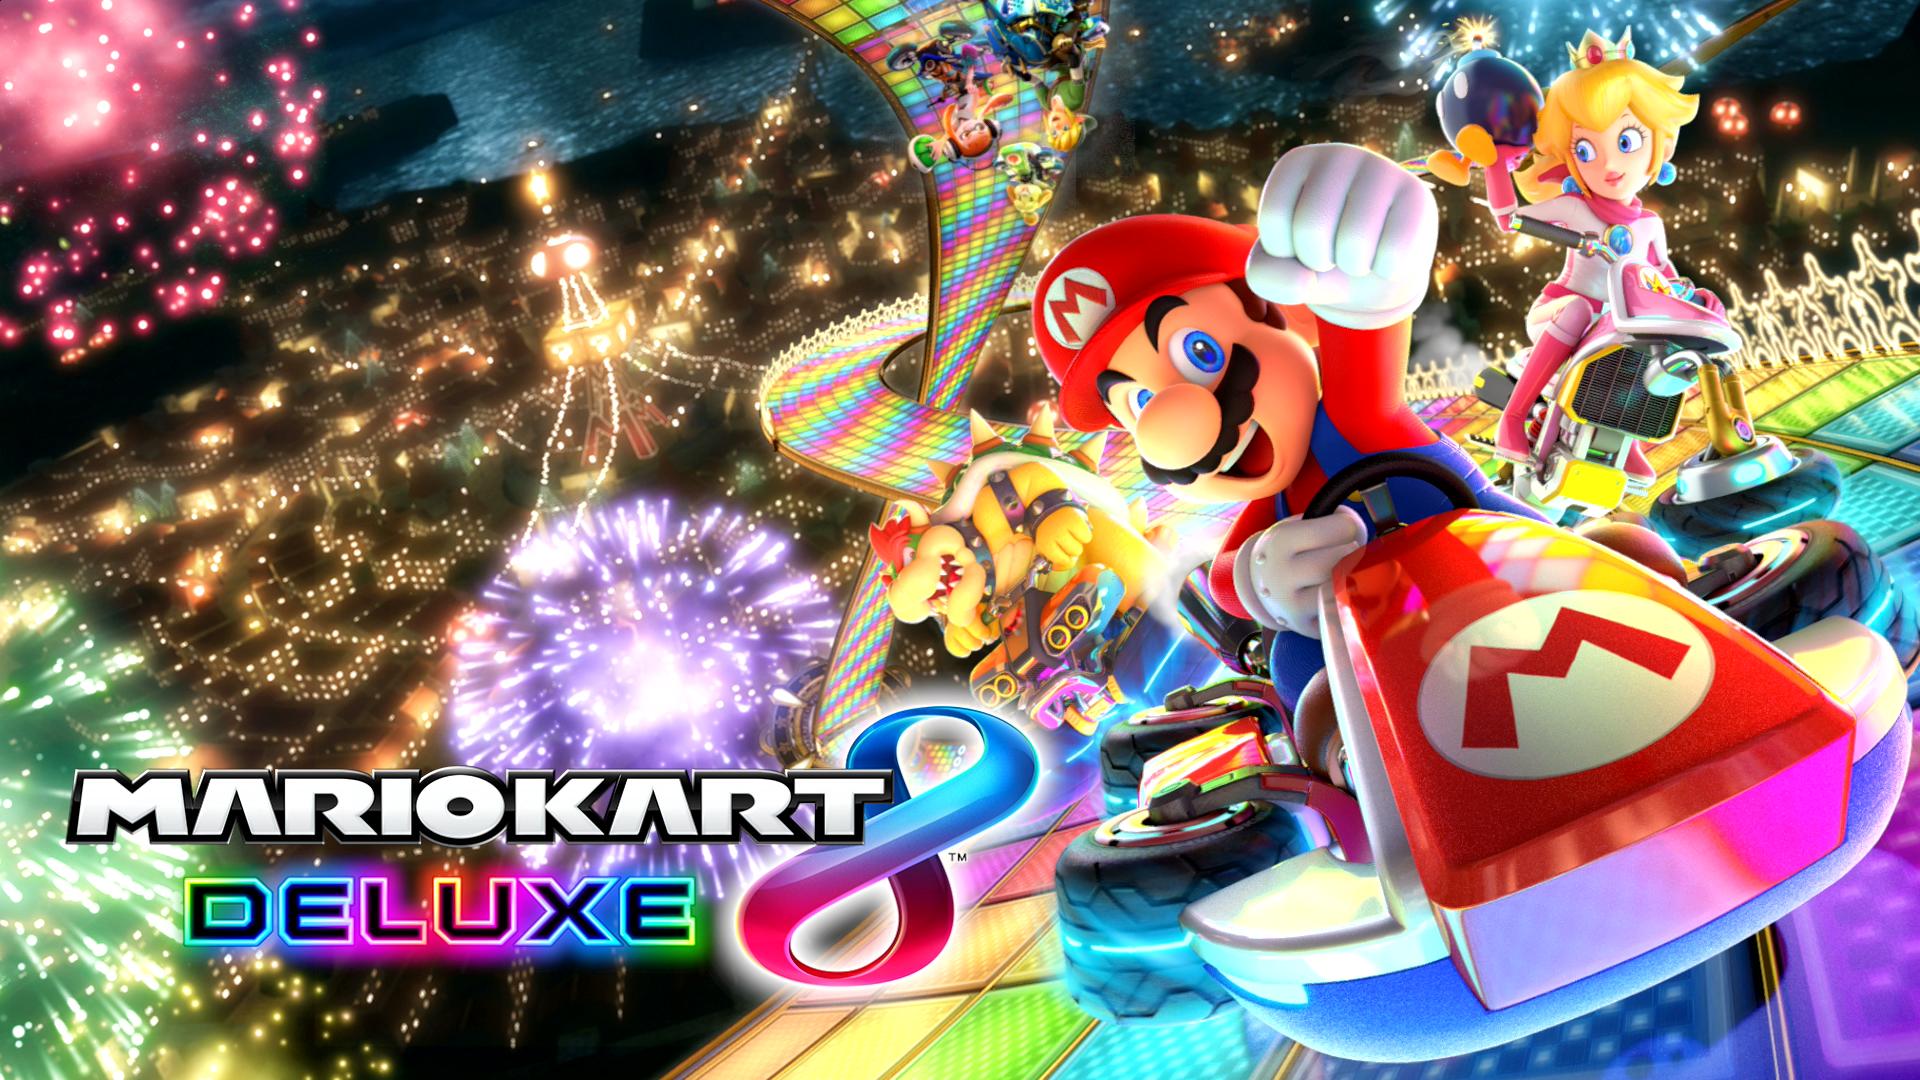 'Mario Kart 8 Deluxe' Best Karts Top builds to take the gold